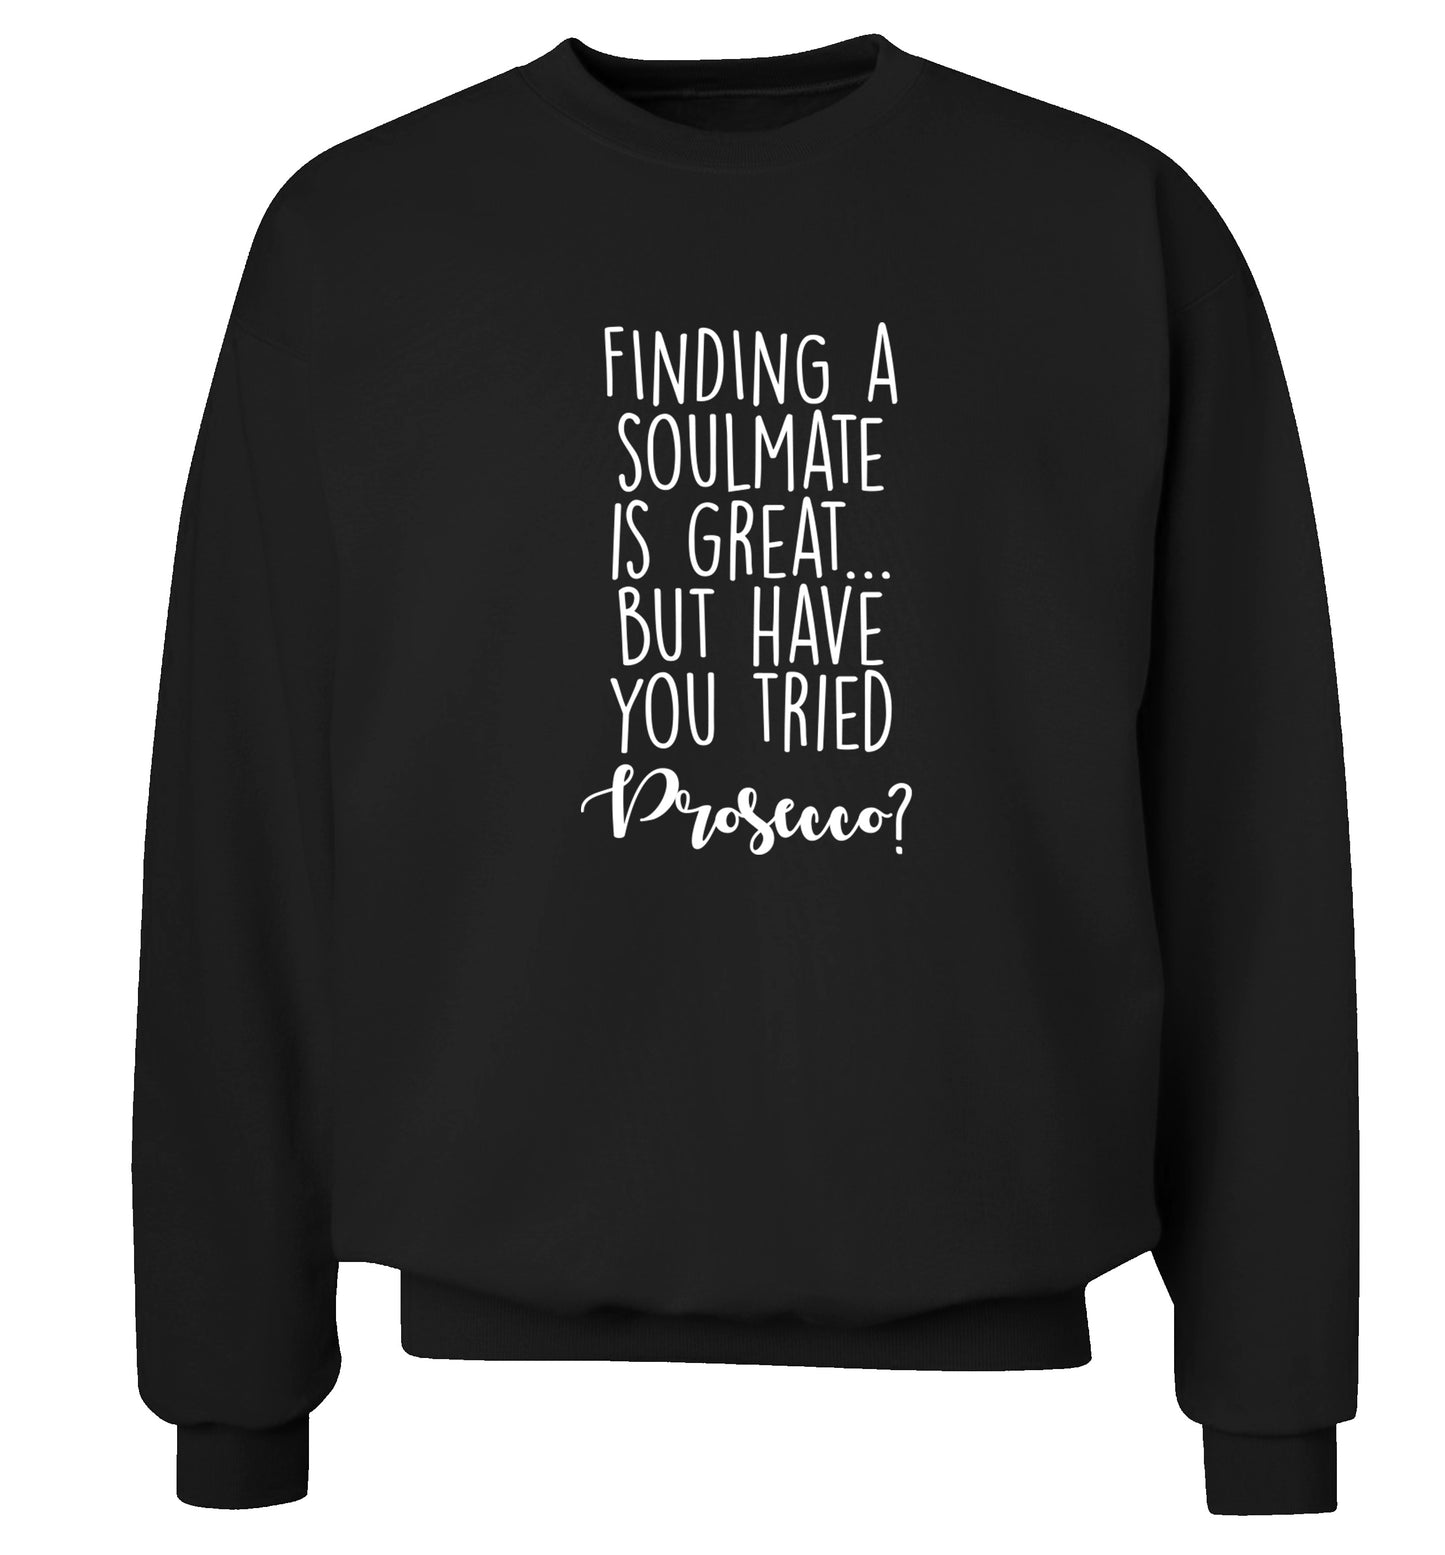 Finding a soulmate is great but have you tried prosecco? Adult's unisex black Sweater 2XL